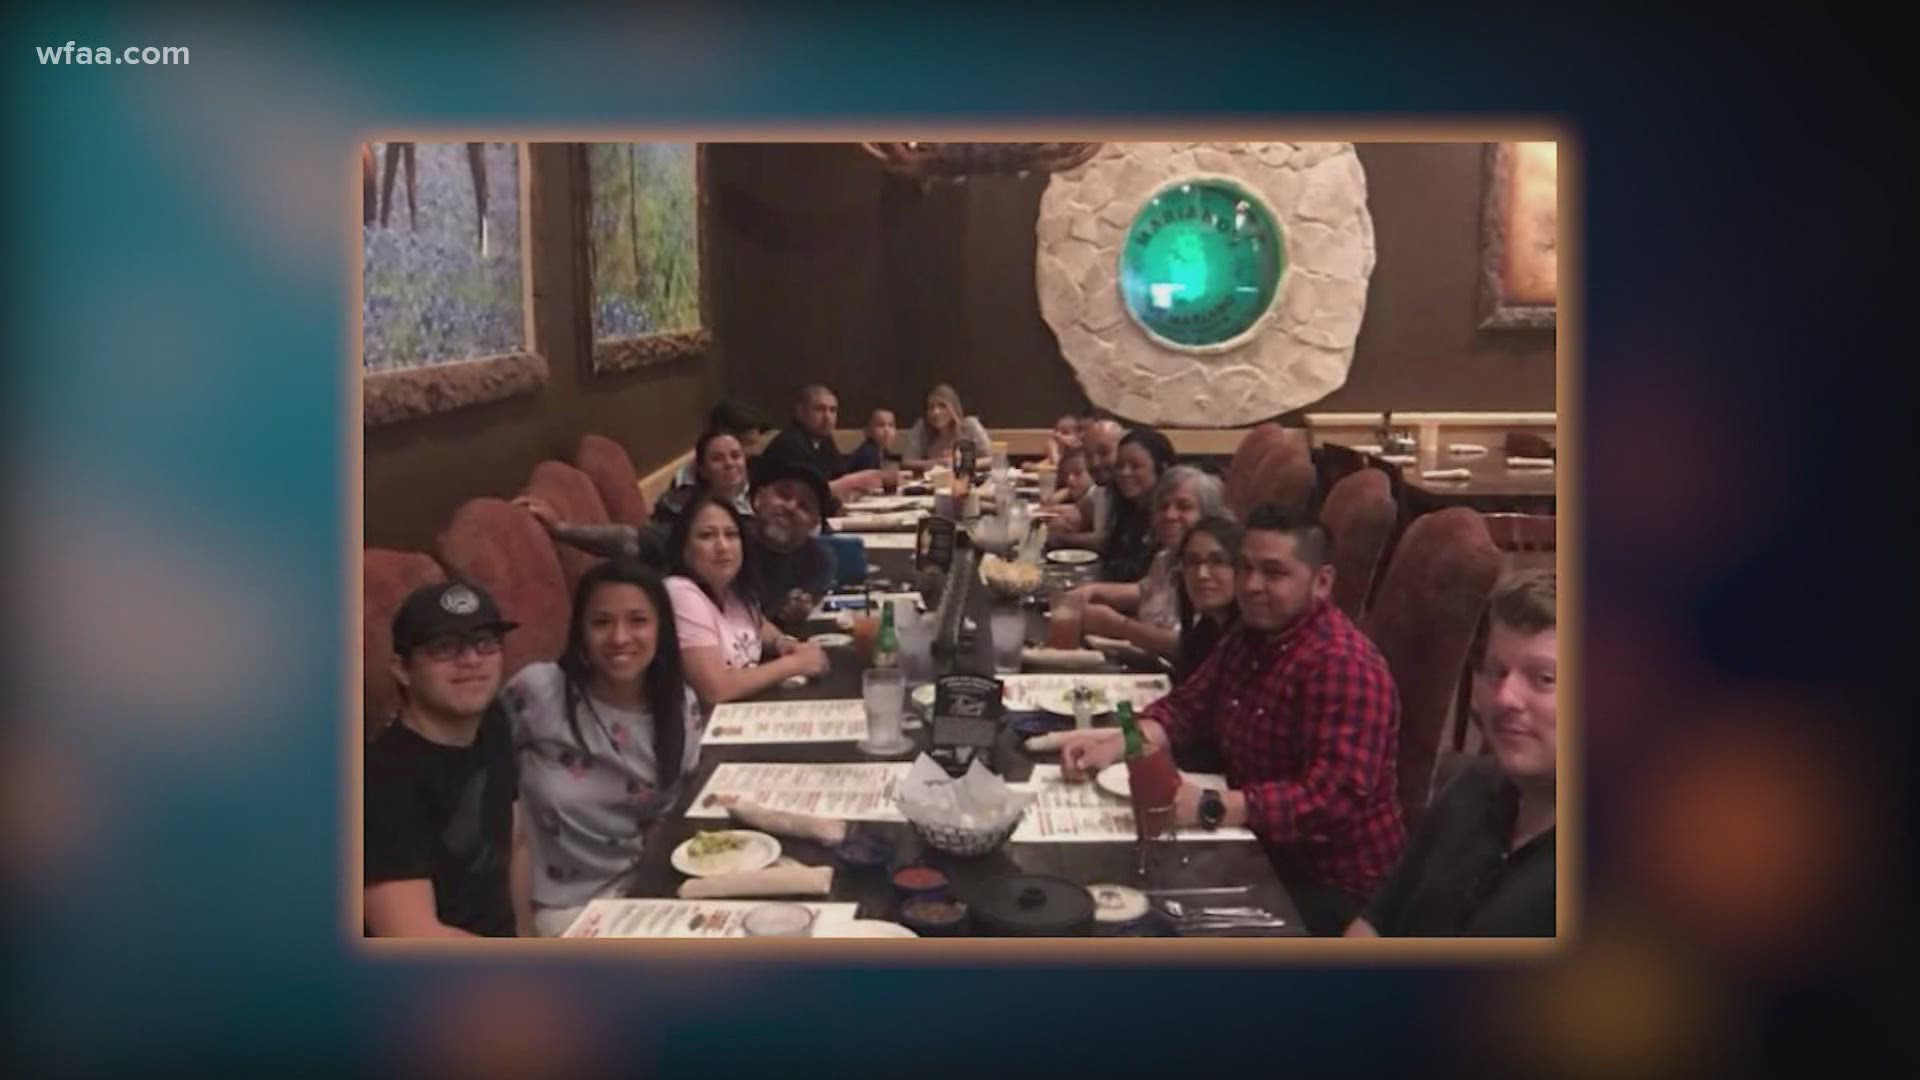 A family in North Texas is warning people about the risks of holding small gatherings as several of them have contracted COVID-19 and one has died.